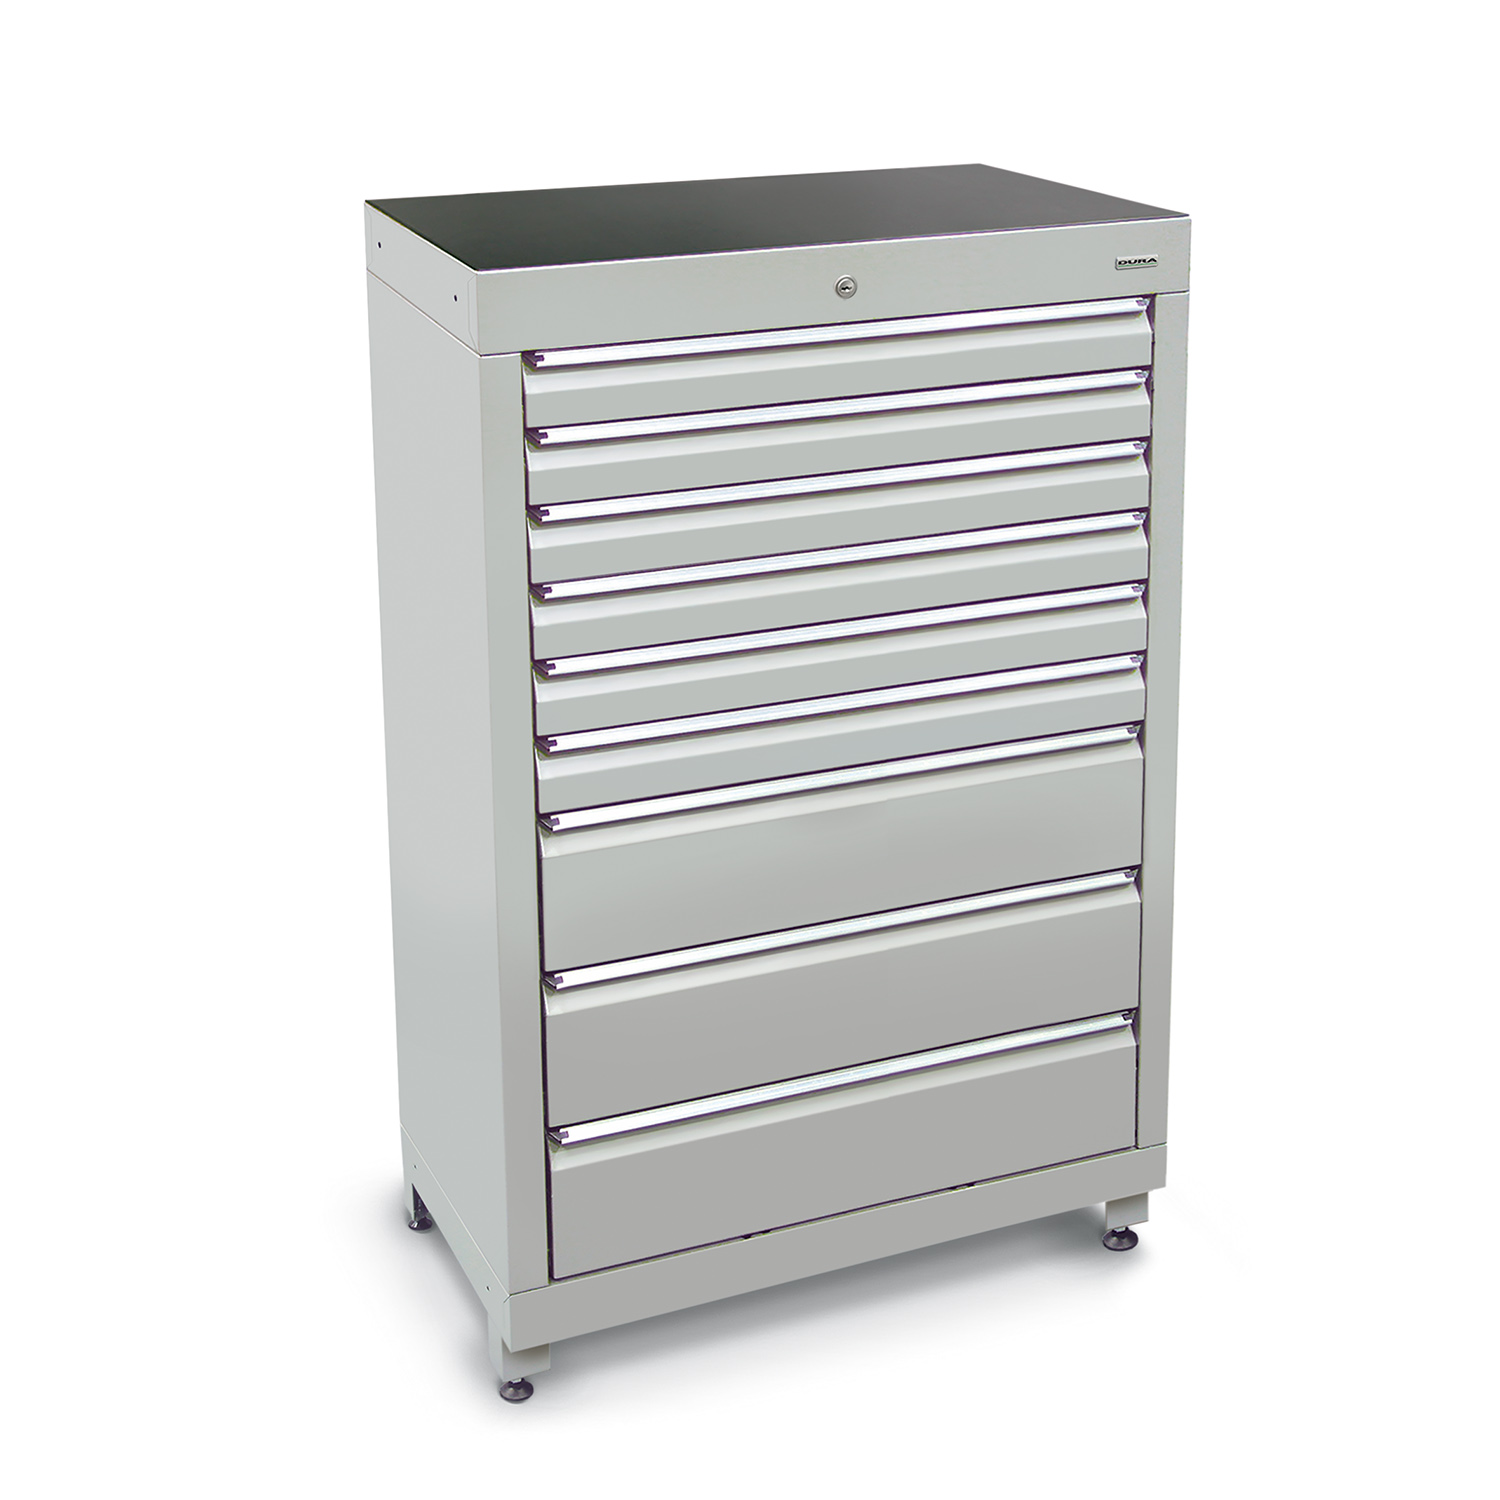 900mm Multi-drawer high tool cabinets with 9 drawers (6 medium, 3 large) and feet